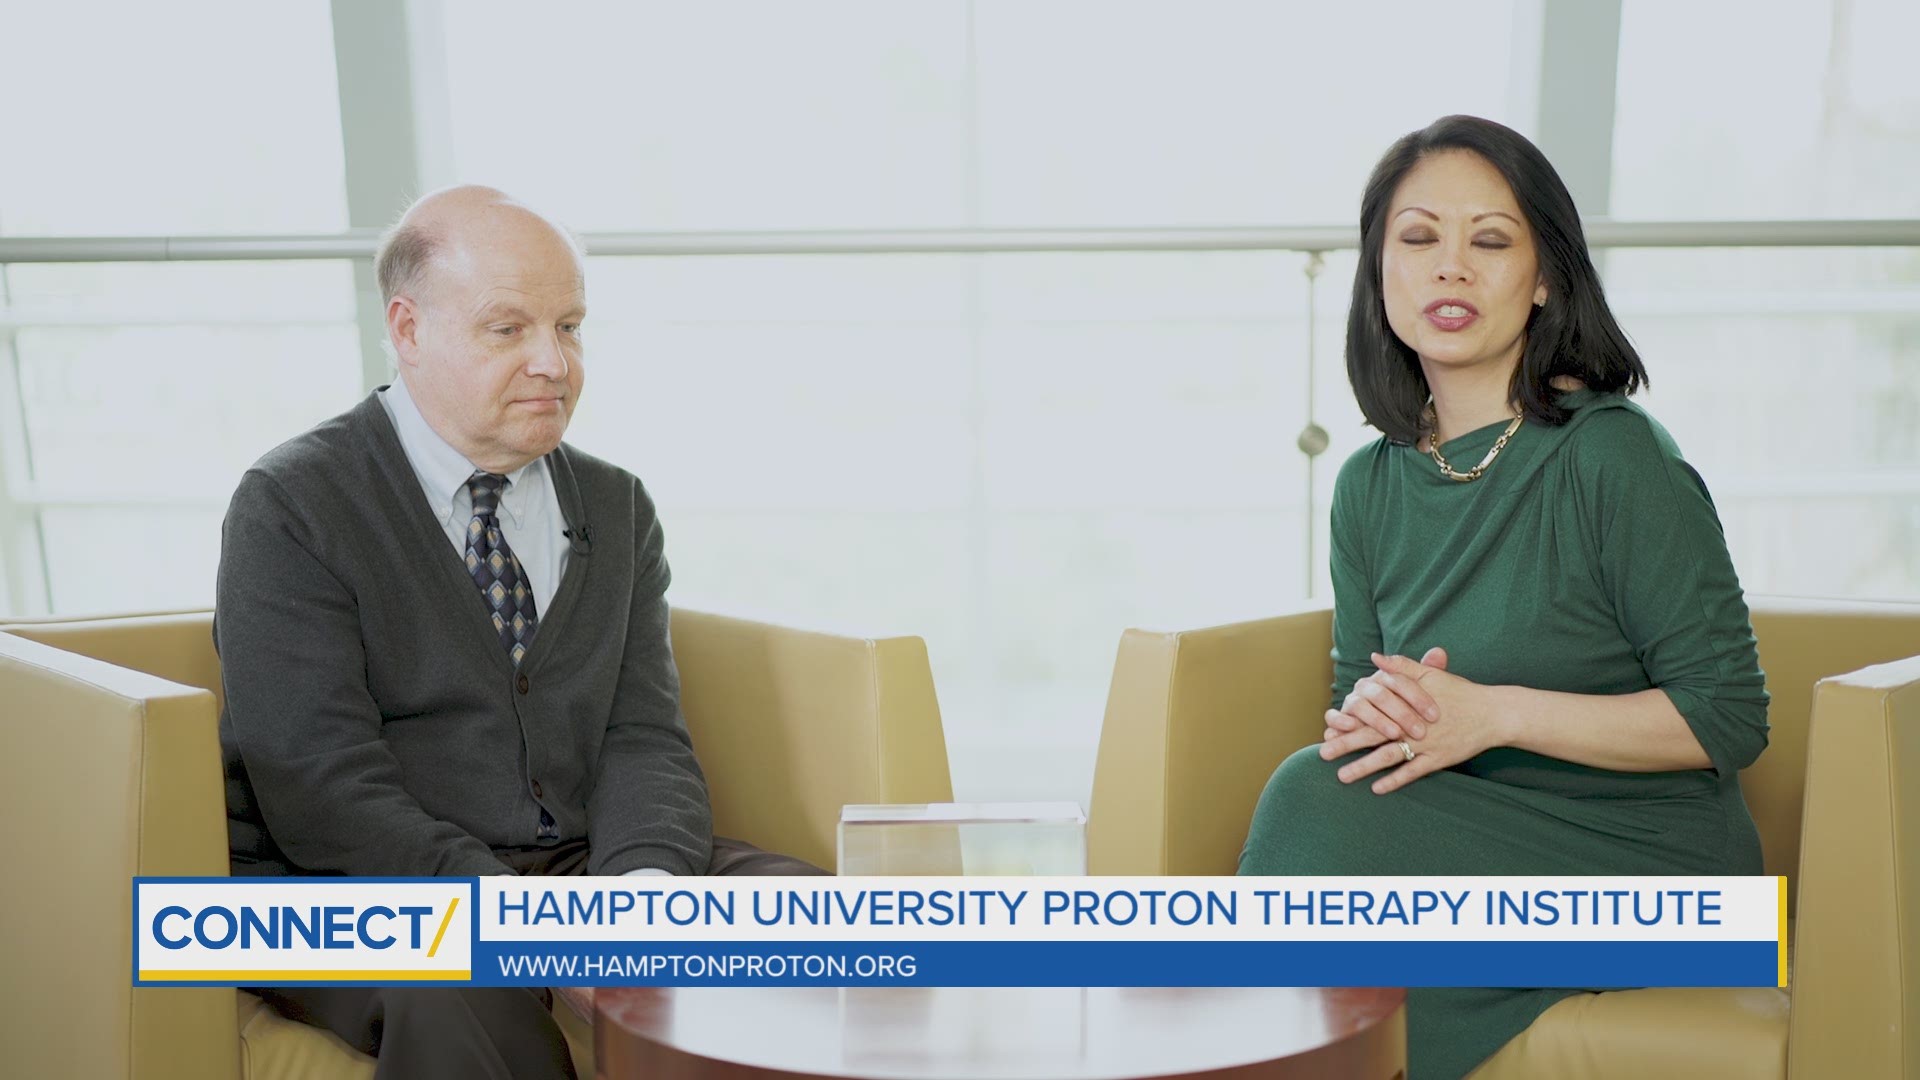 Since it opened in 2010, over 2,500 patients have been treated at Hampton University Proton Therapy Institute. Dr. Allan Thornton tells us about Proton Therapy.